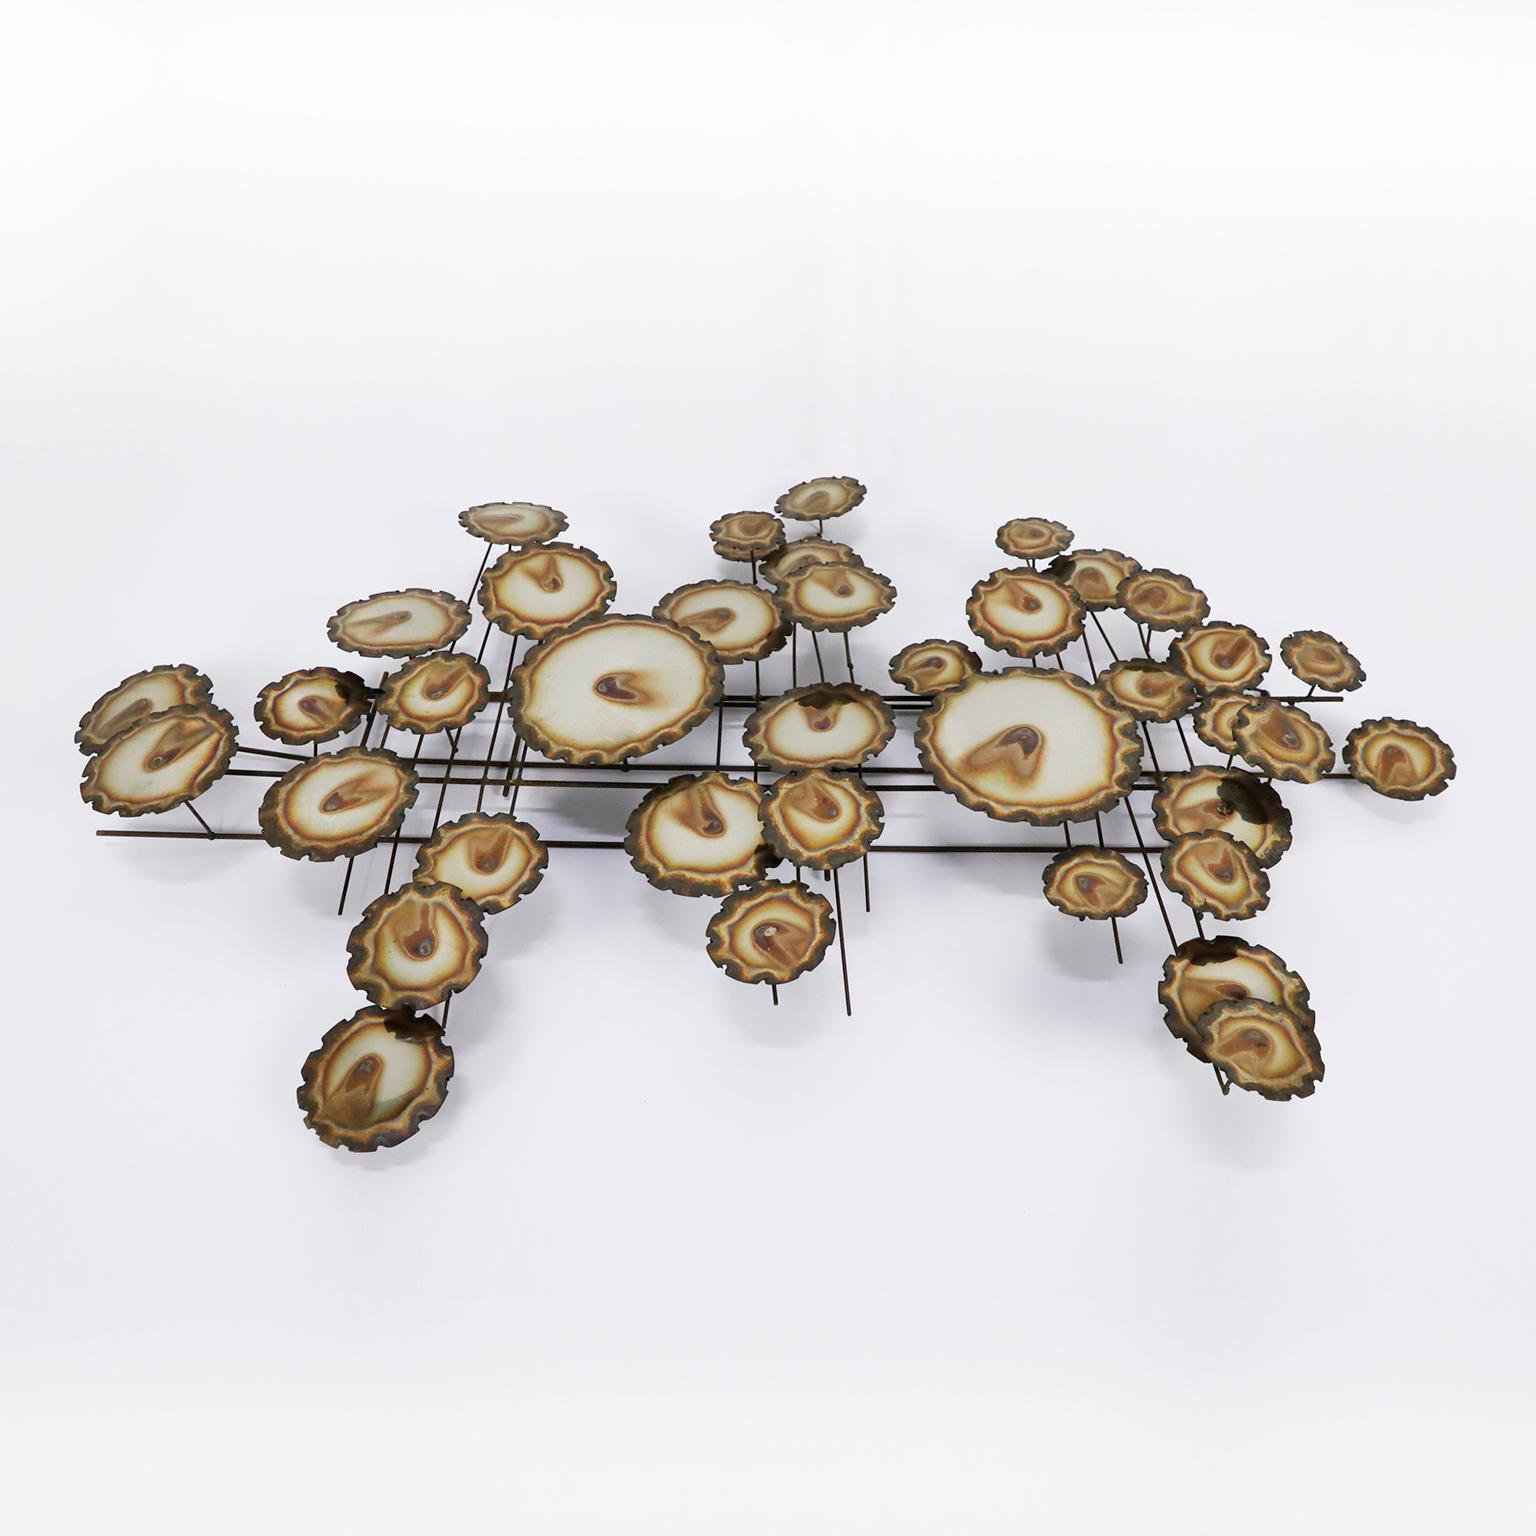 We offer this brutalist wall sculpture made in steel and brass. Made in Mexico 1970 by Manuel Díaz.